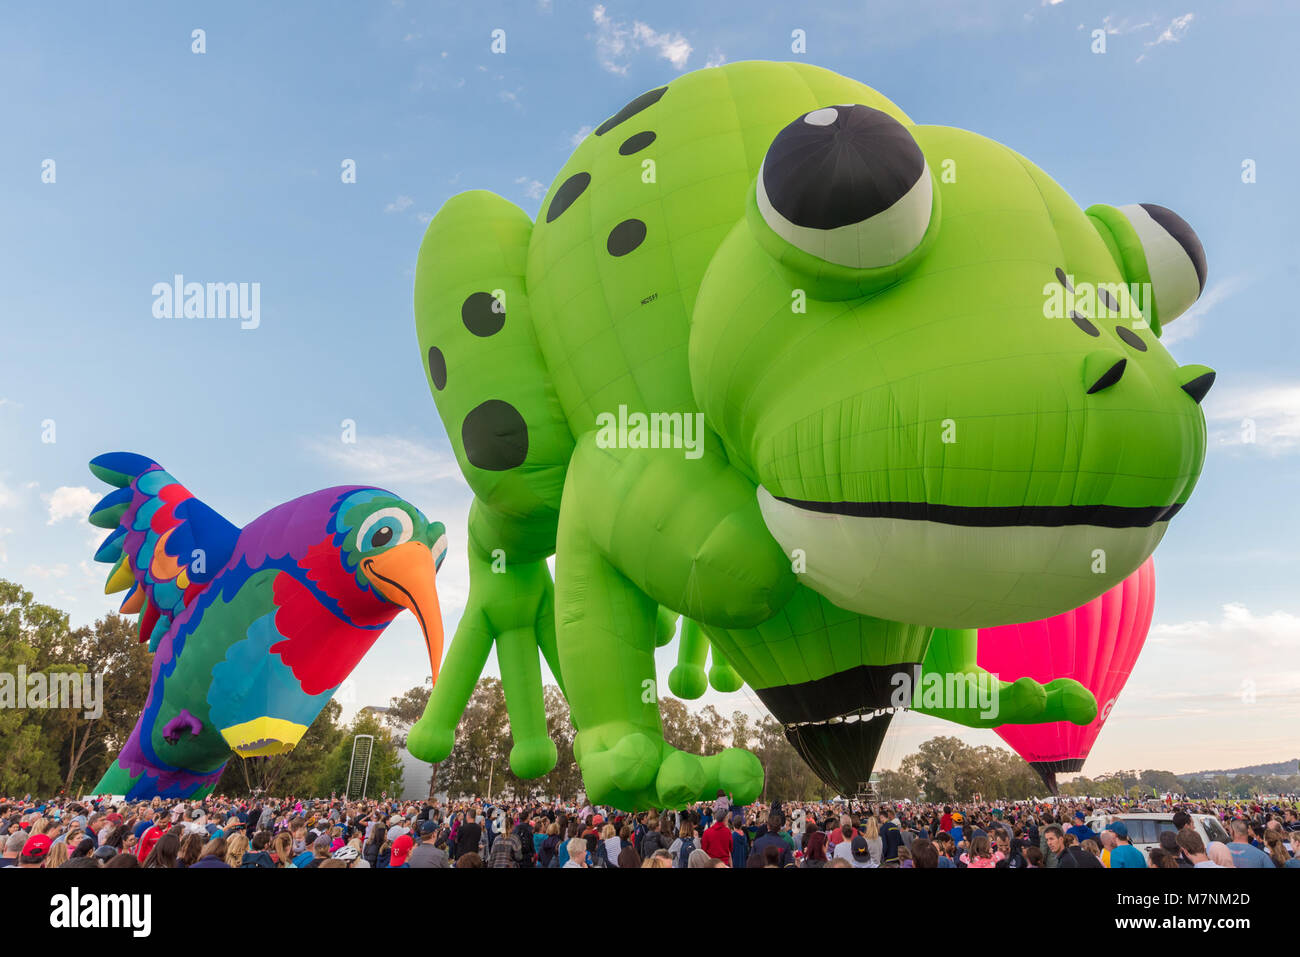 Canberra, Australia, 12th March, 2018. Hot air balloon festival in Canberra. Kermie the frog makes a grand appearance for the first time at Canberra's annual hot air balloon event. This event goes for nine days. Monday morning's lack of wind brought out many people eager to see this graceful balloons take to the sky. Sam Nerrie/ Alamy Live News Stock Photo